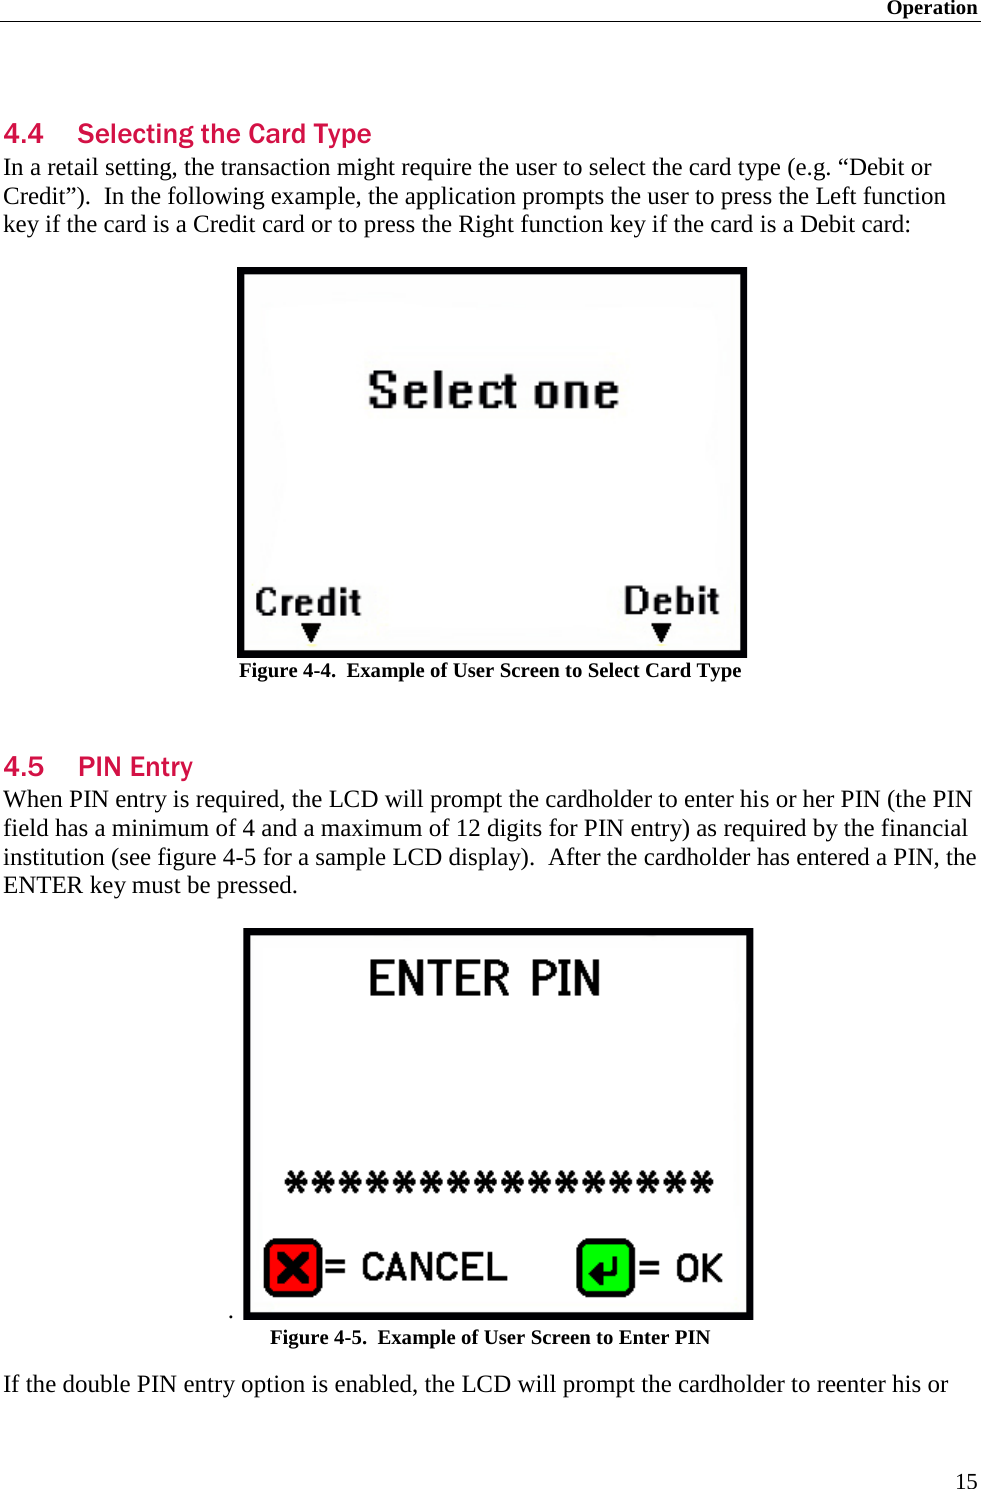 Operation 15  4.4 Selecting the Card Type In a retail setting, the transaction might require the user to select the card type (e.g. “Debit or Credit”).  In the following example, the application prompts the user to press the Left function key if the card is a Credit card or to press the Right function key if the card is a Debit card:   Figure 4-4.  Example of User Screen to Select Card Type  4.5 PIN Entry When PIN entry is required, the LCD will prompt the cardholder to enter his or her PIN (the PIN field has a minimum of 4 and a maximum of 12 digits for PIN entry) as required by the financial institution (see figure 4-5 for a sample LCD display).  After the cardholder has entered a PIN, the ENTER key must be pressed.  .    Figure 4-5.  Example of User Screen to Enter PIN If the double PIN entry option is enabled, the LCD will prompt the cardholder to reenter his or 